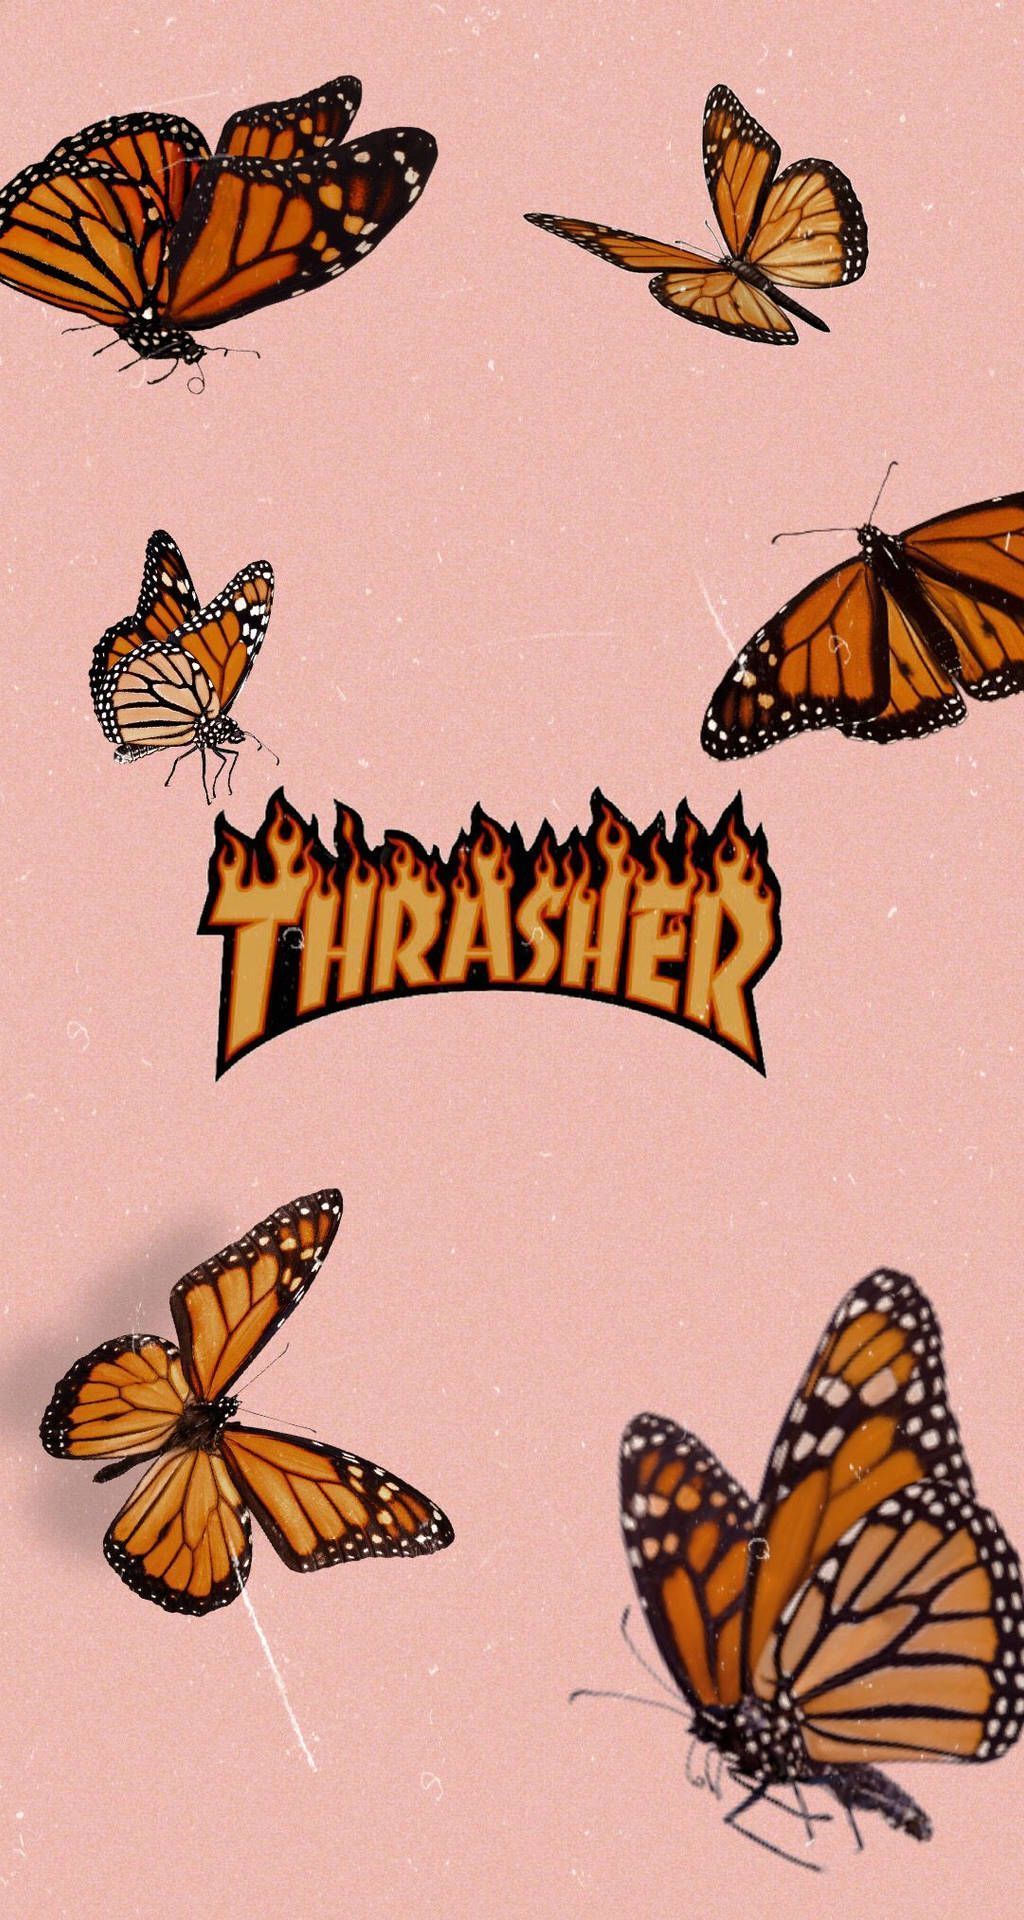 A group of butterflies with the word thirsher in flames - Thrasher, butterfly